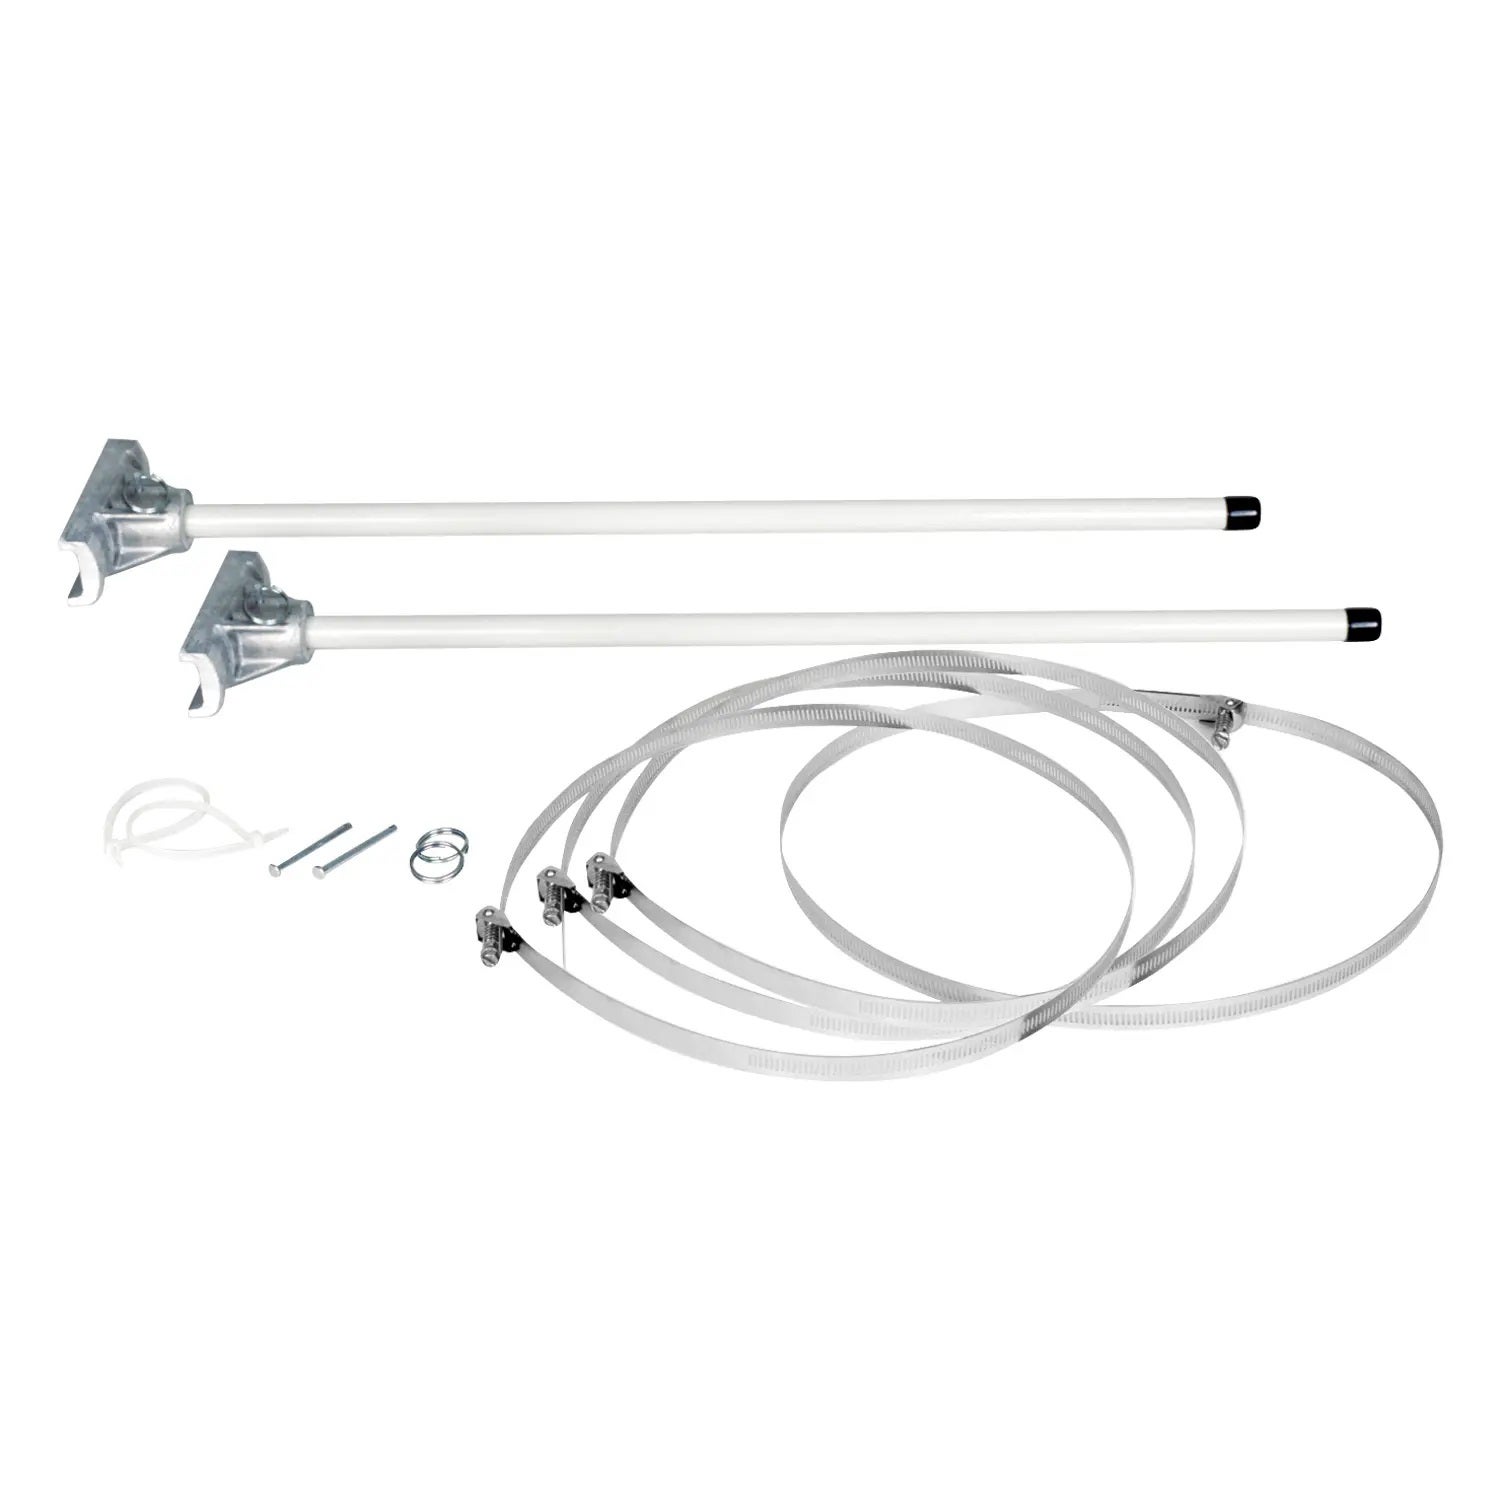 <strong>Pole Banner Kit Includes:</Strong><br>• 2 Poles<br>• 2 Brackets<br>• Assembly Hardware